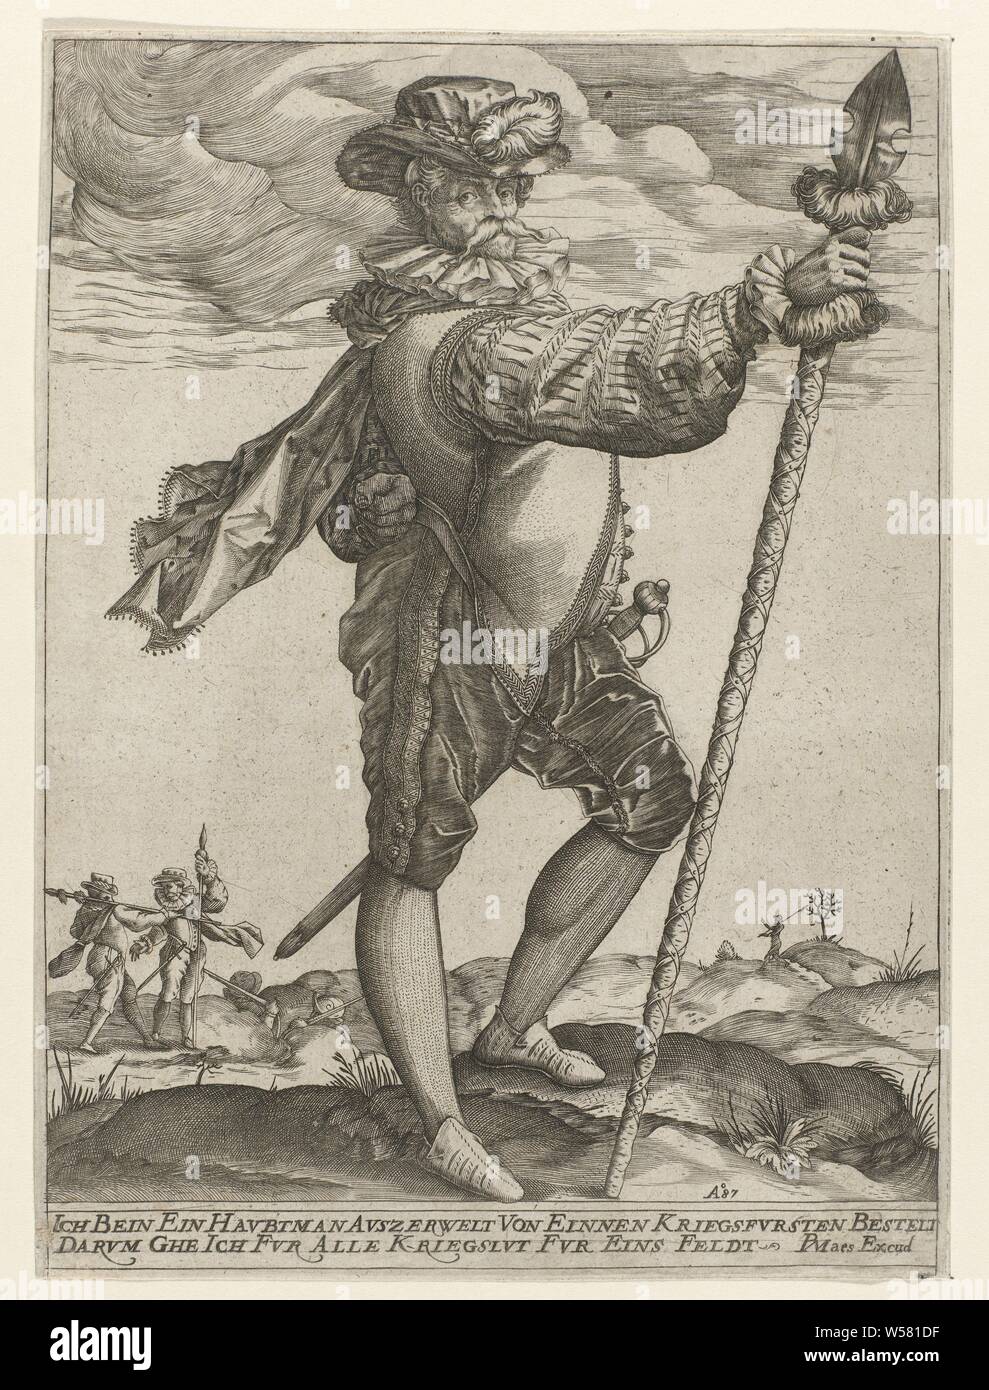 Officer with lance Three military officers from the Dutch army (series title), An officer with a stab weapon (partisan) in his right hand standing in a landscape. In the background infantry troops. Below the show two lines of text in German., Helved weapons, polearms (for striking, hacking, thrusting): lance, Pieter Maes, Keulen, 1587, paper, engraving, h 212 mm × w 156 mm Stock Photo